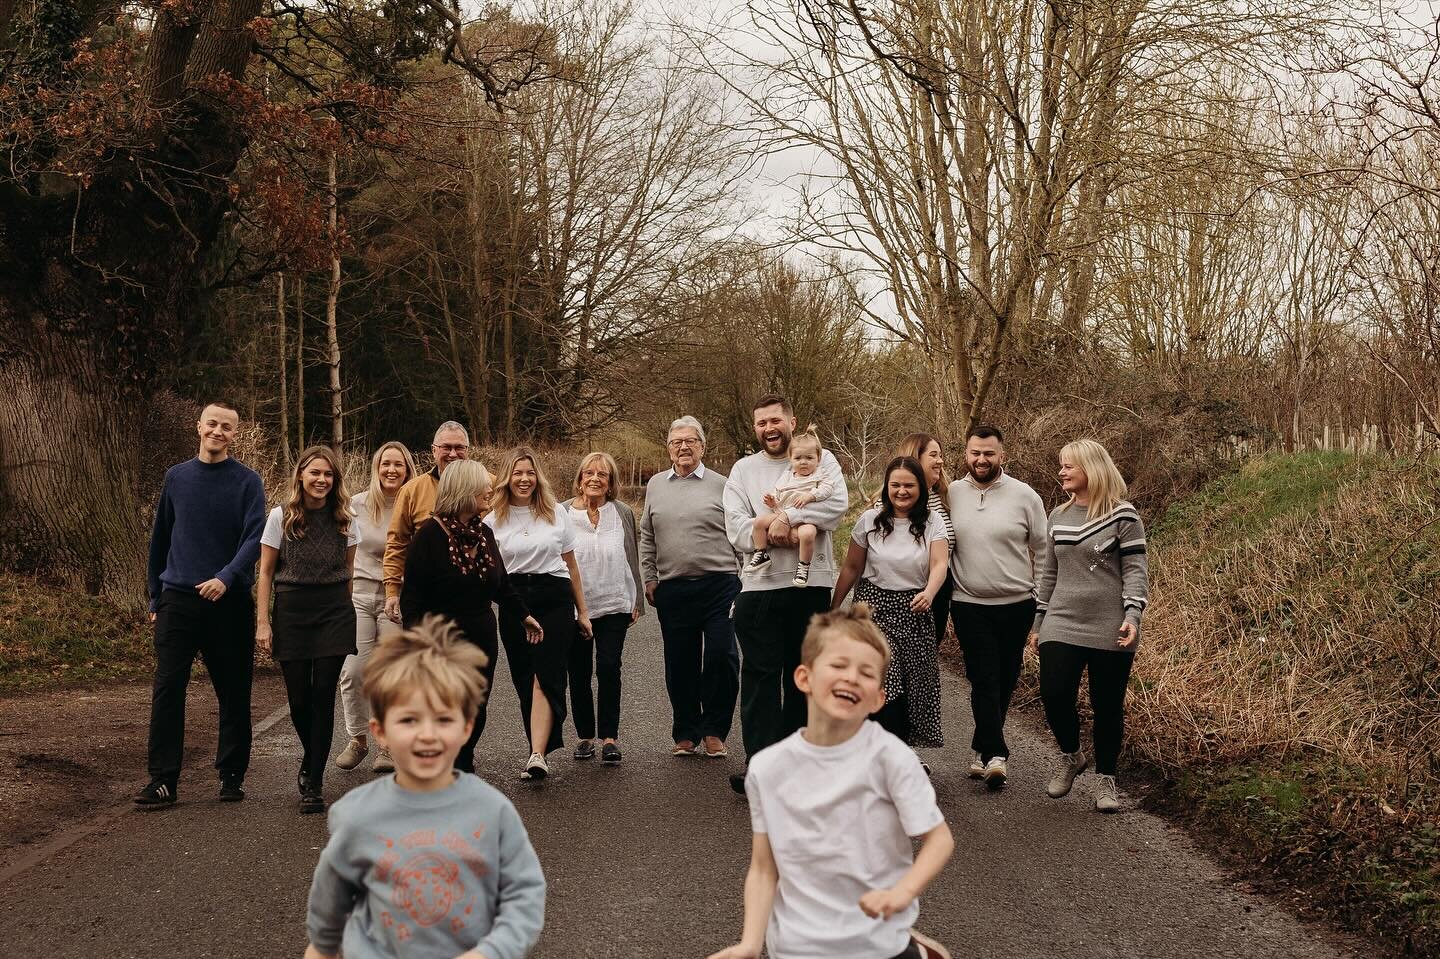 Big family shoots&hellip;

It&rsquo;s a yes from me.

Let&rsquo;s face it, life is hectic and crazy and you don&rsquo;t always get to see your specials all that often. @gemma_okeeffe smashed it by arranging all of her family to get together to make s